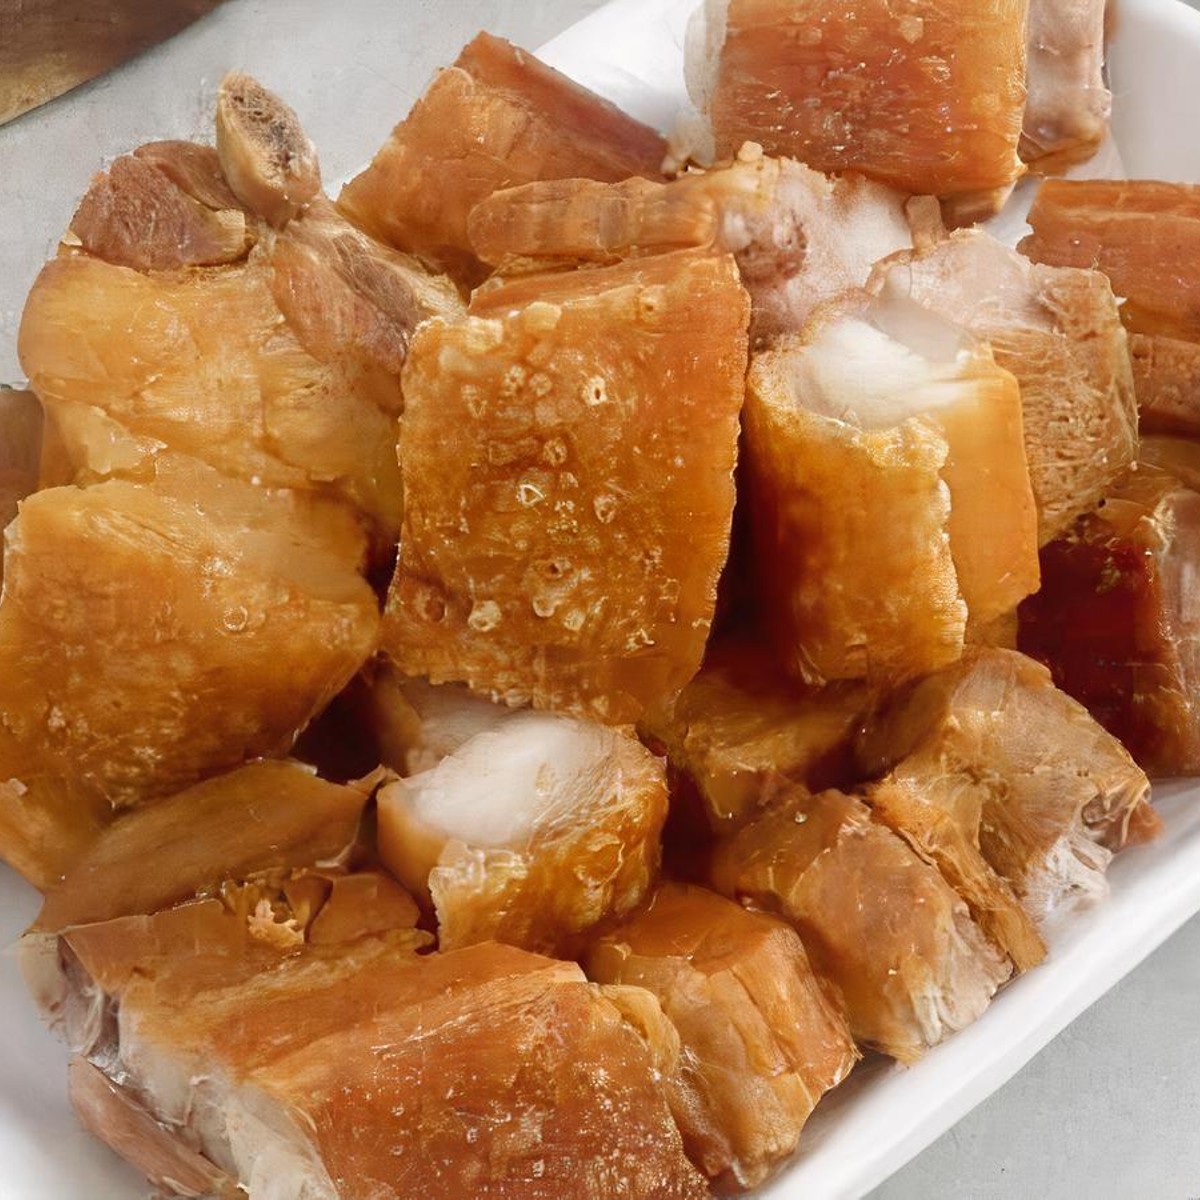 Fried Shanghai rolls, and our crispy deep fried pork belly (Lechon